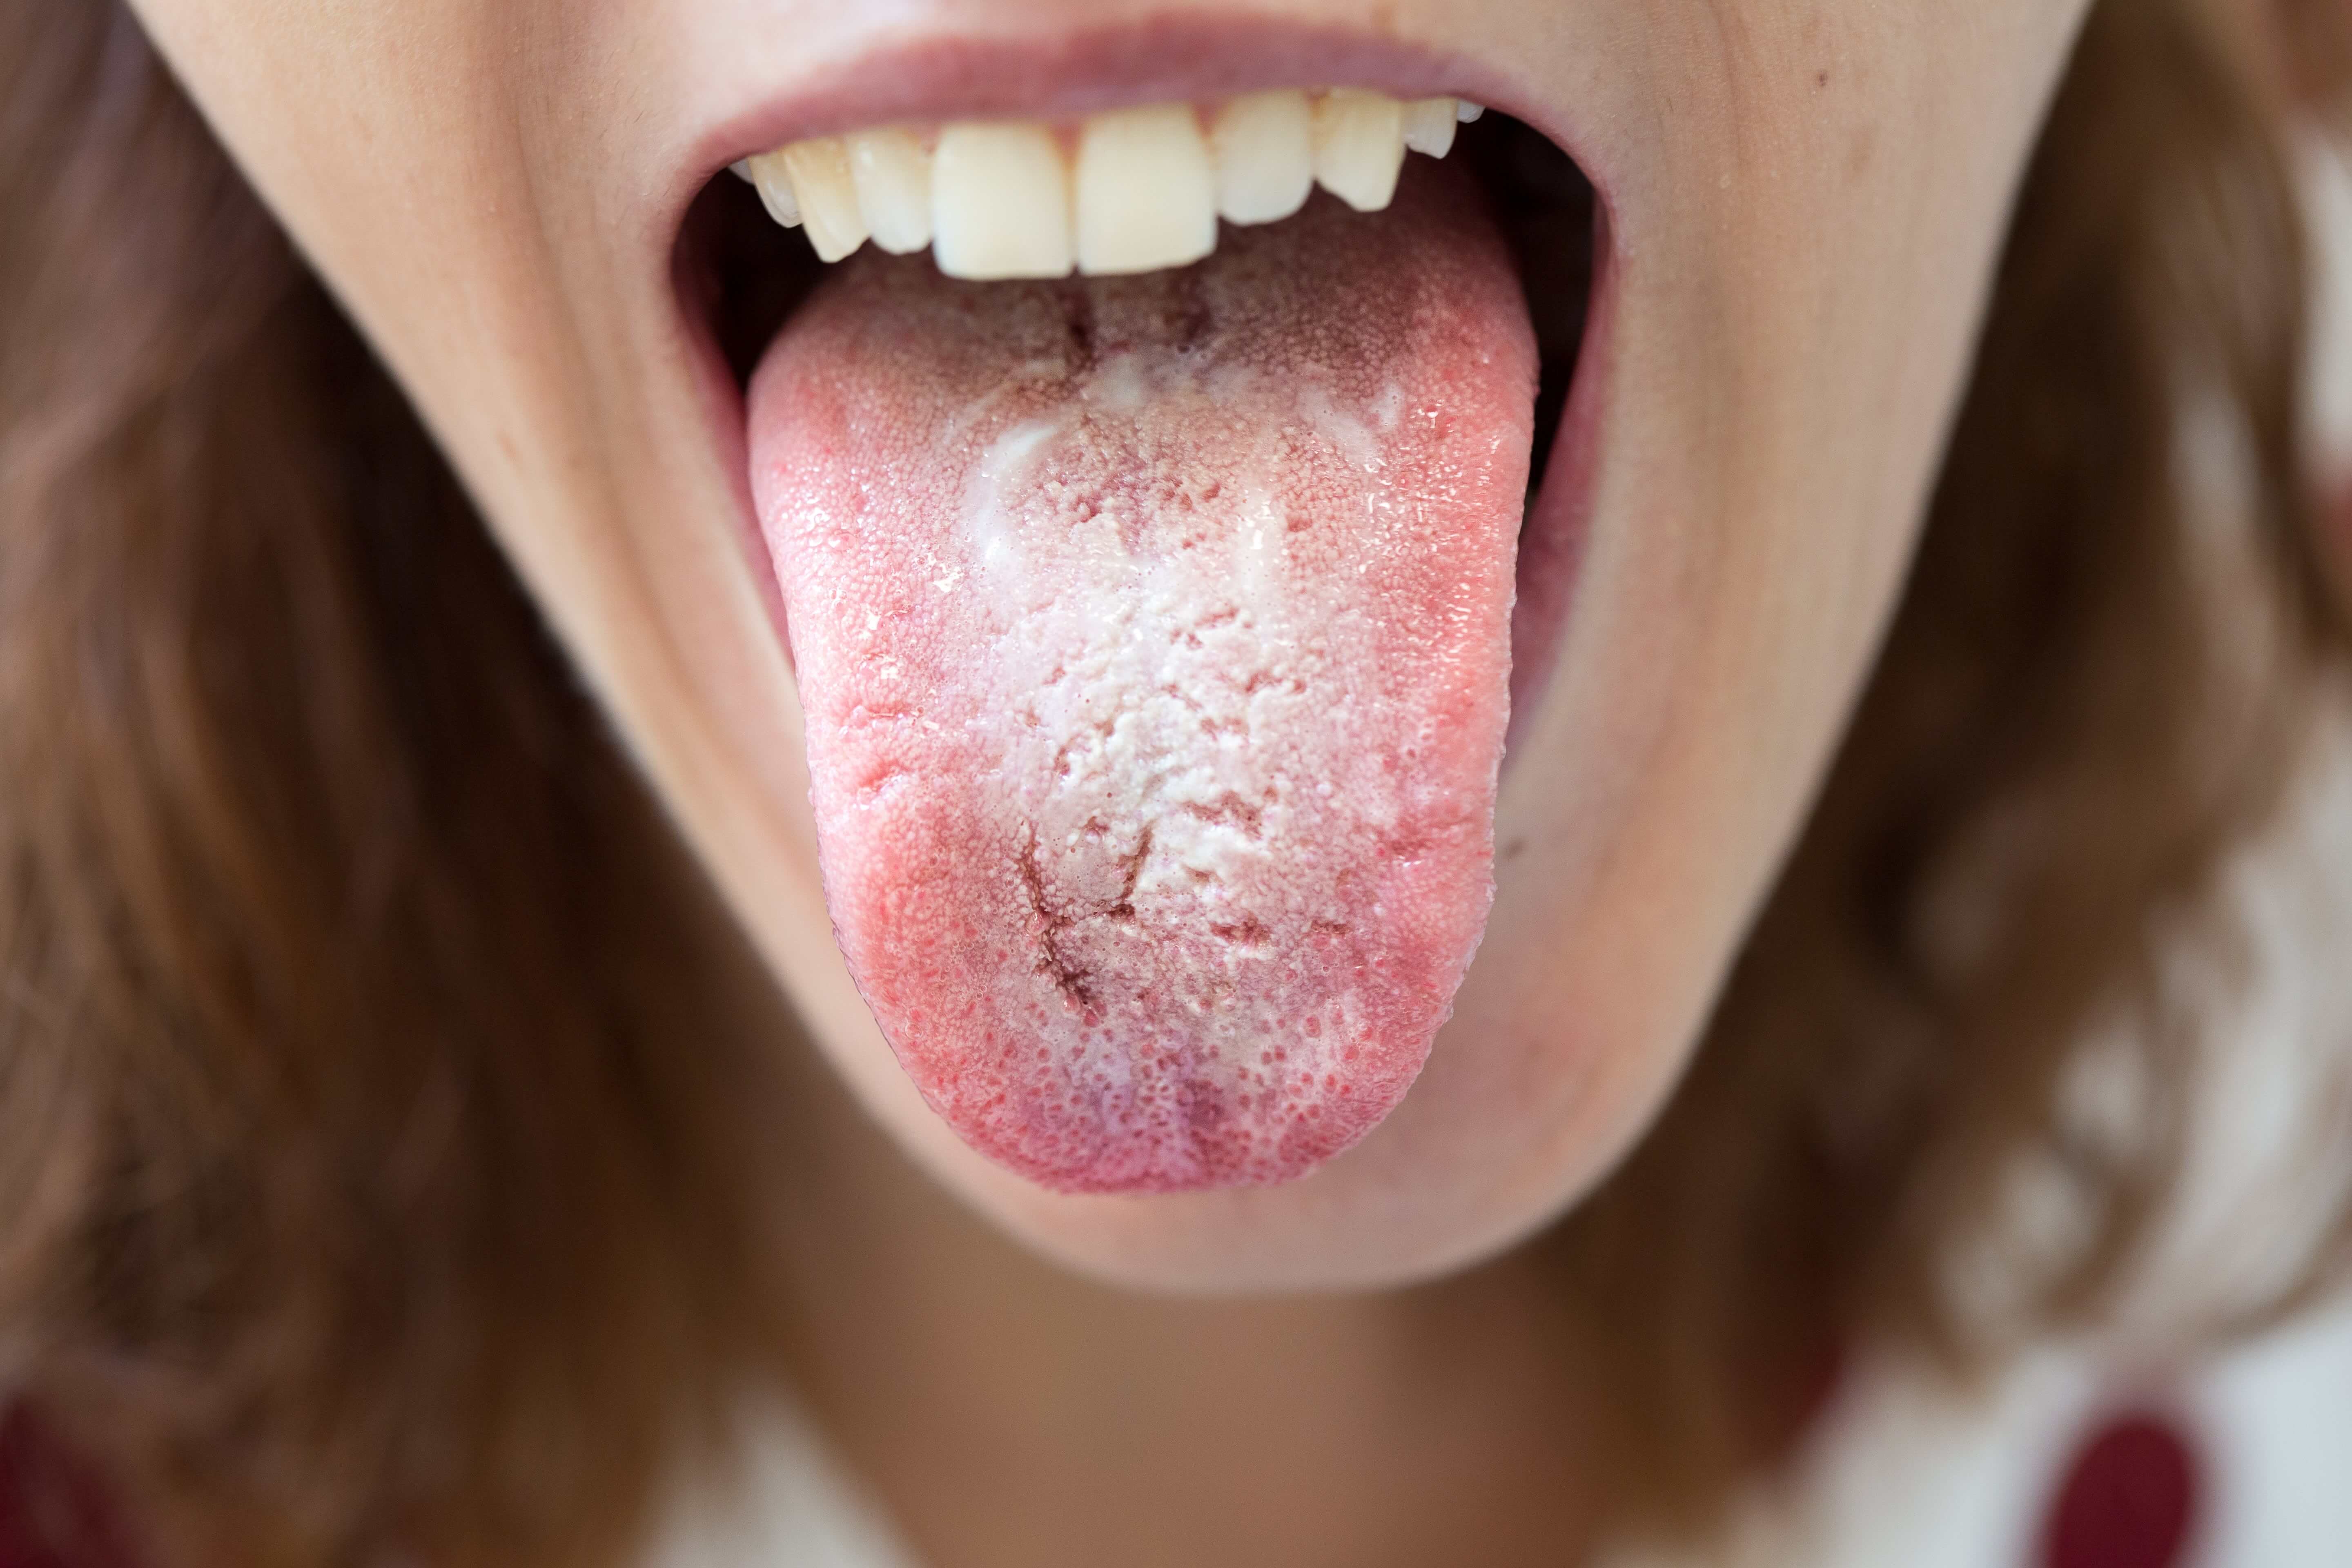 thrush infection in mouth